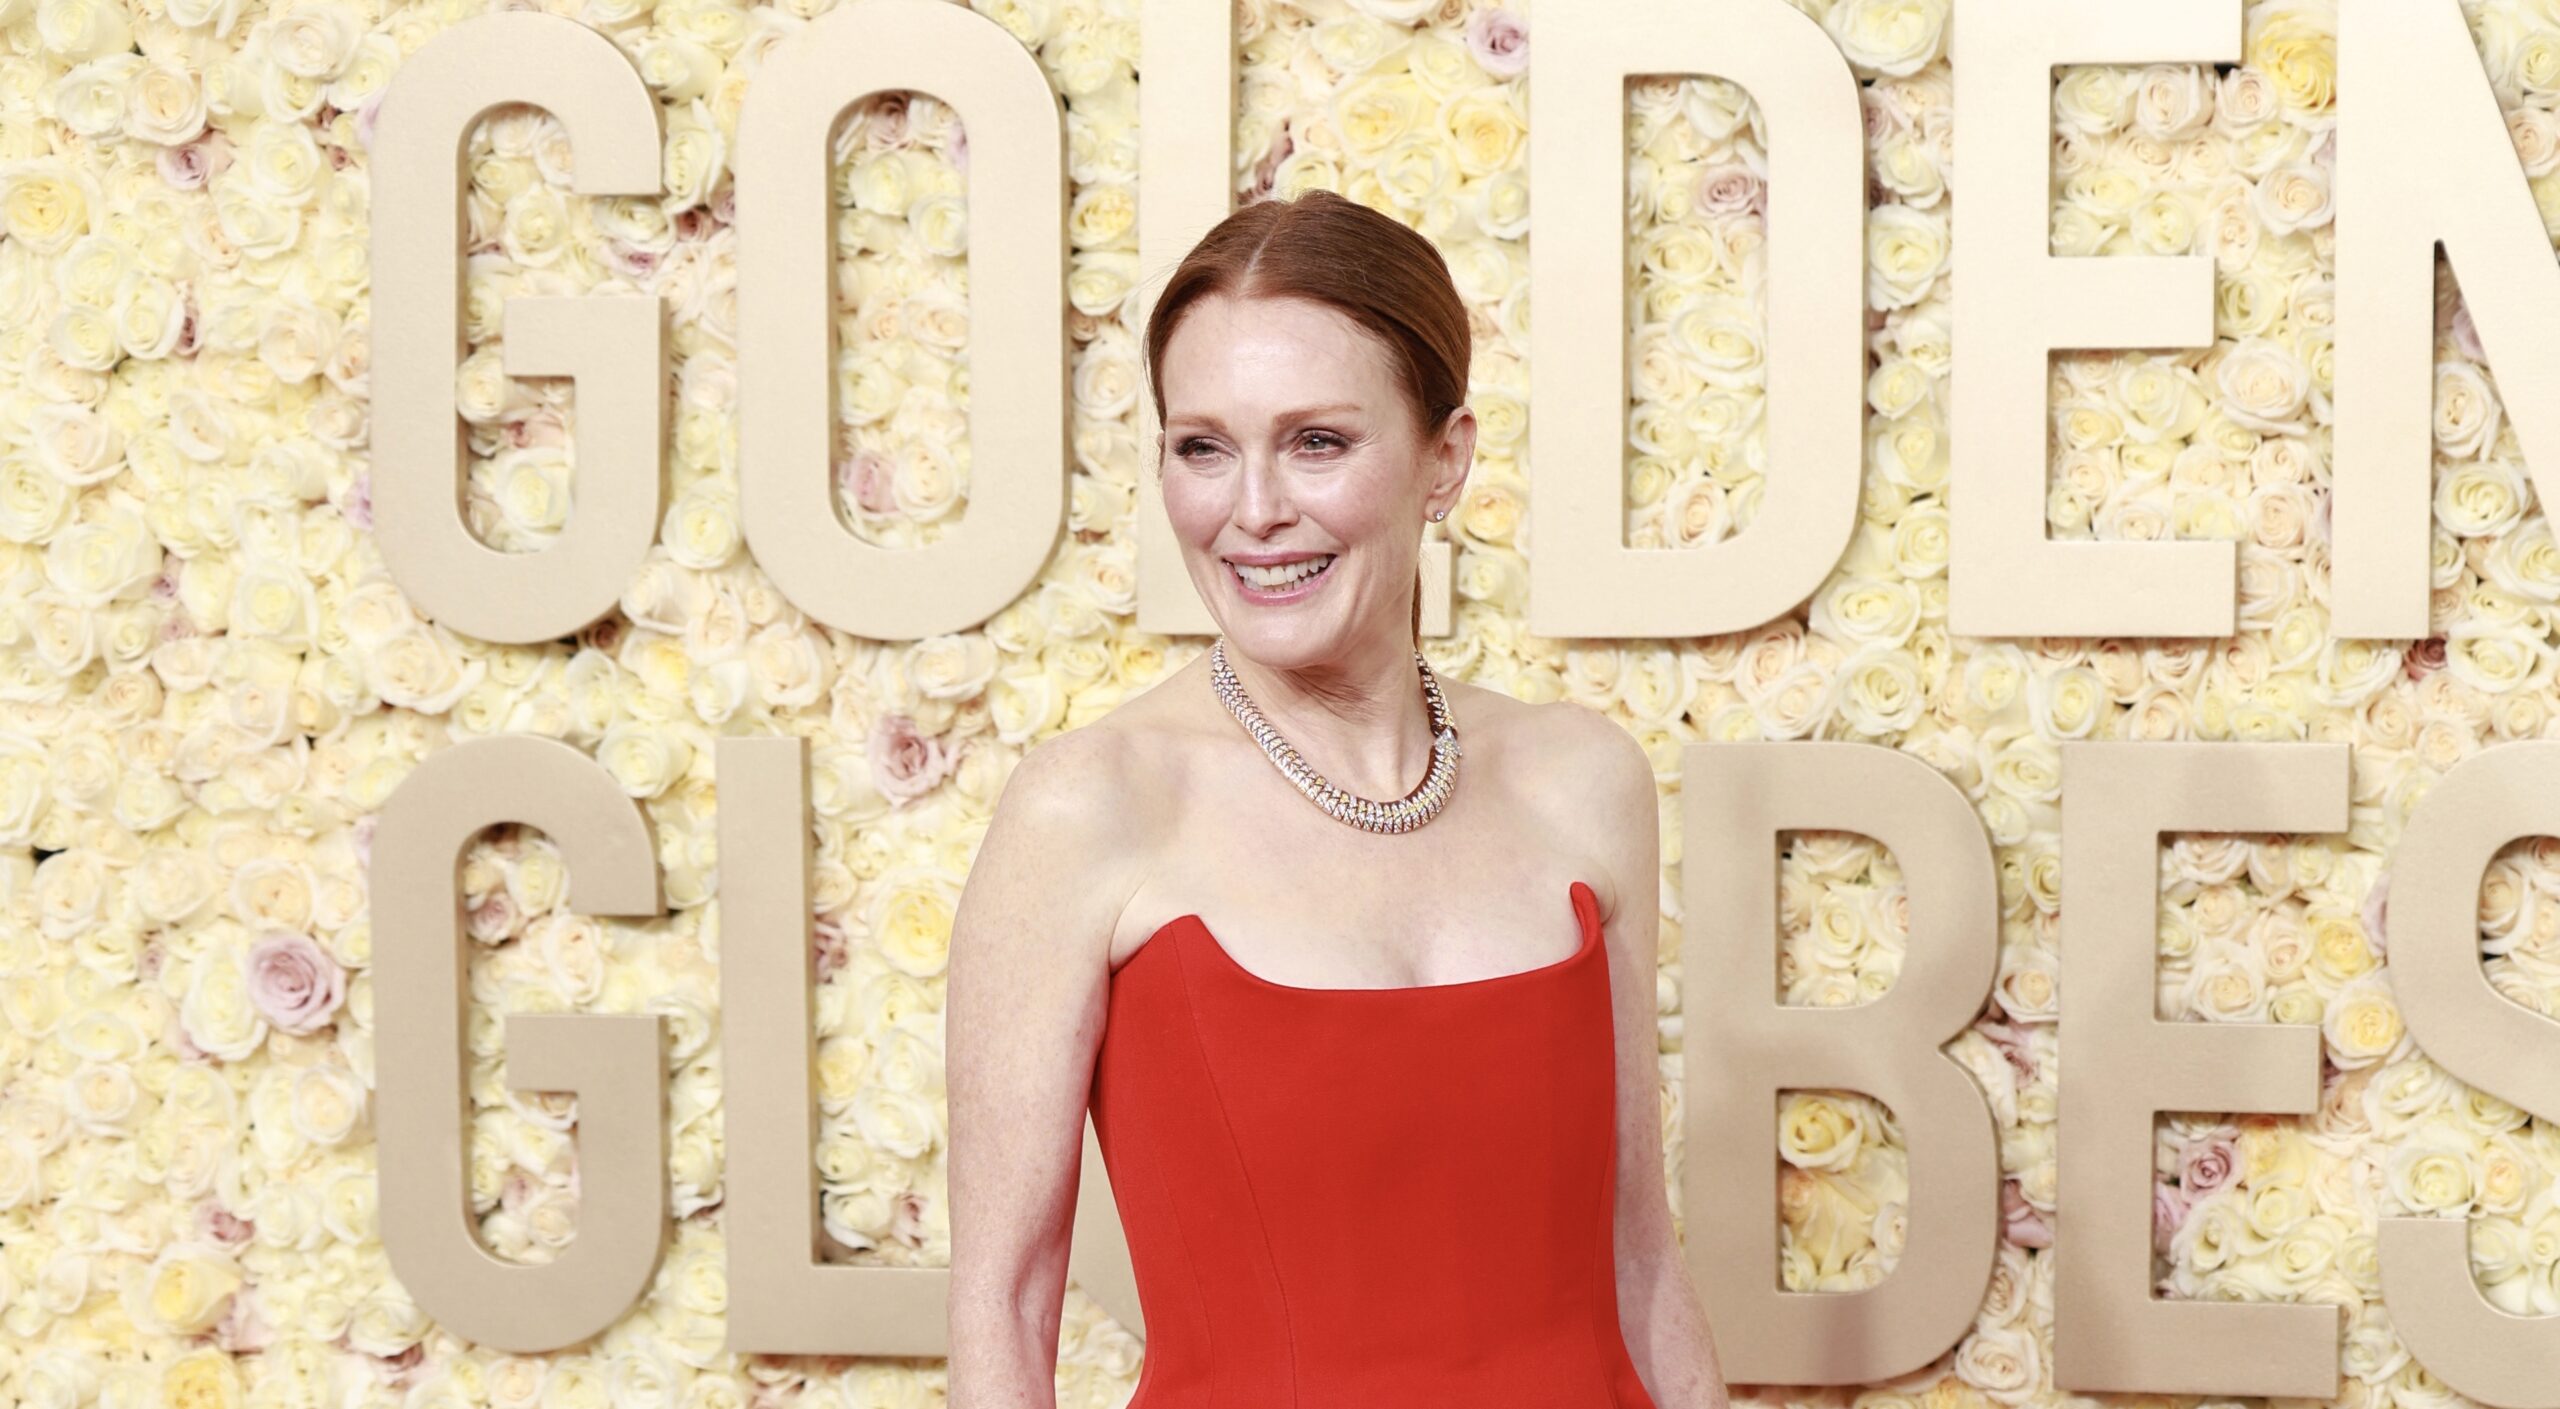 Julianne Moore stands gracefully on the red carpet at the 81st Golden Globe Awards, wearing a striking vermilion floor-length gown. The dress features a classic fit-and-flare silhouette with a strapless bodice, adding a timeless elegance to the event. Her necklace, a string of pearls, complements her attire, while her poised demeanor and light smile capture the essence of the evening's celebratory atmosphere. The background is adorned with a floral arrangement spelling 'GOLDEN GLOBES', enhancing the luxurious ambiance of The Beverly Hilton hotel in Beverly Hills, California.